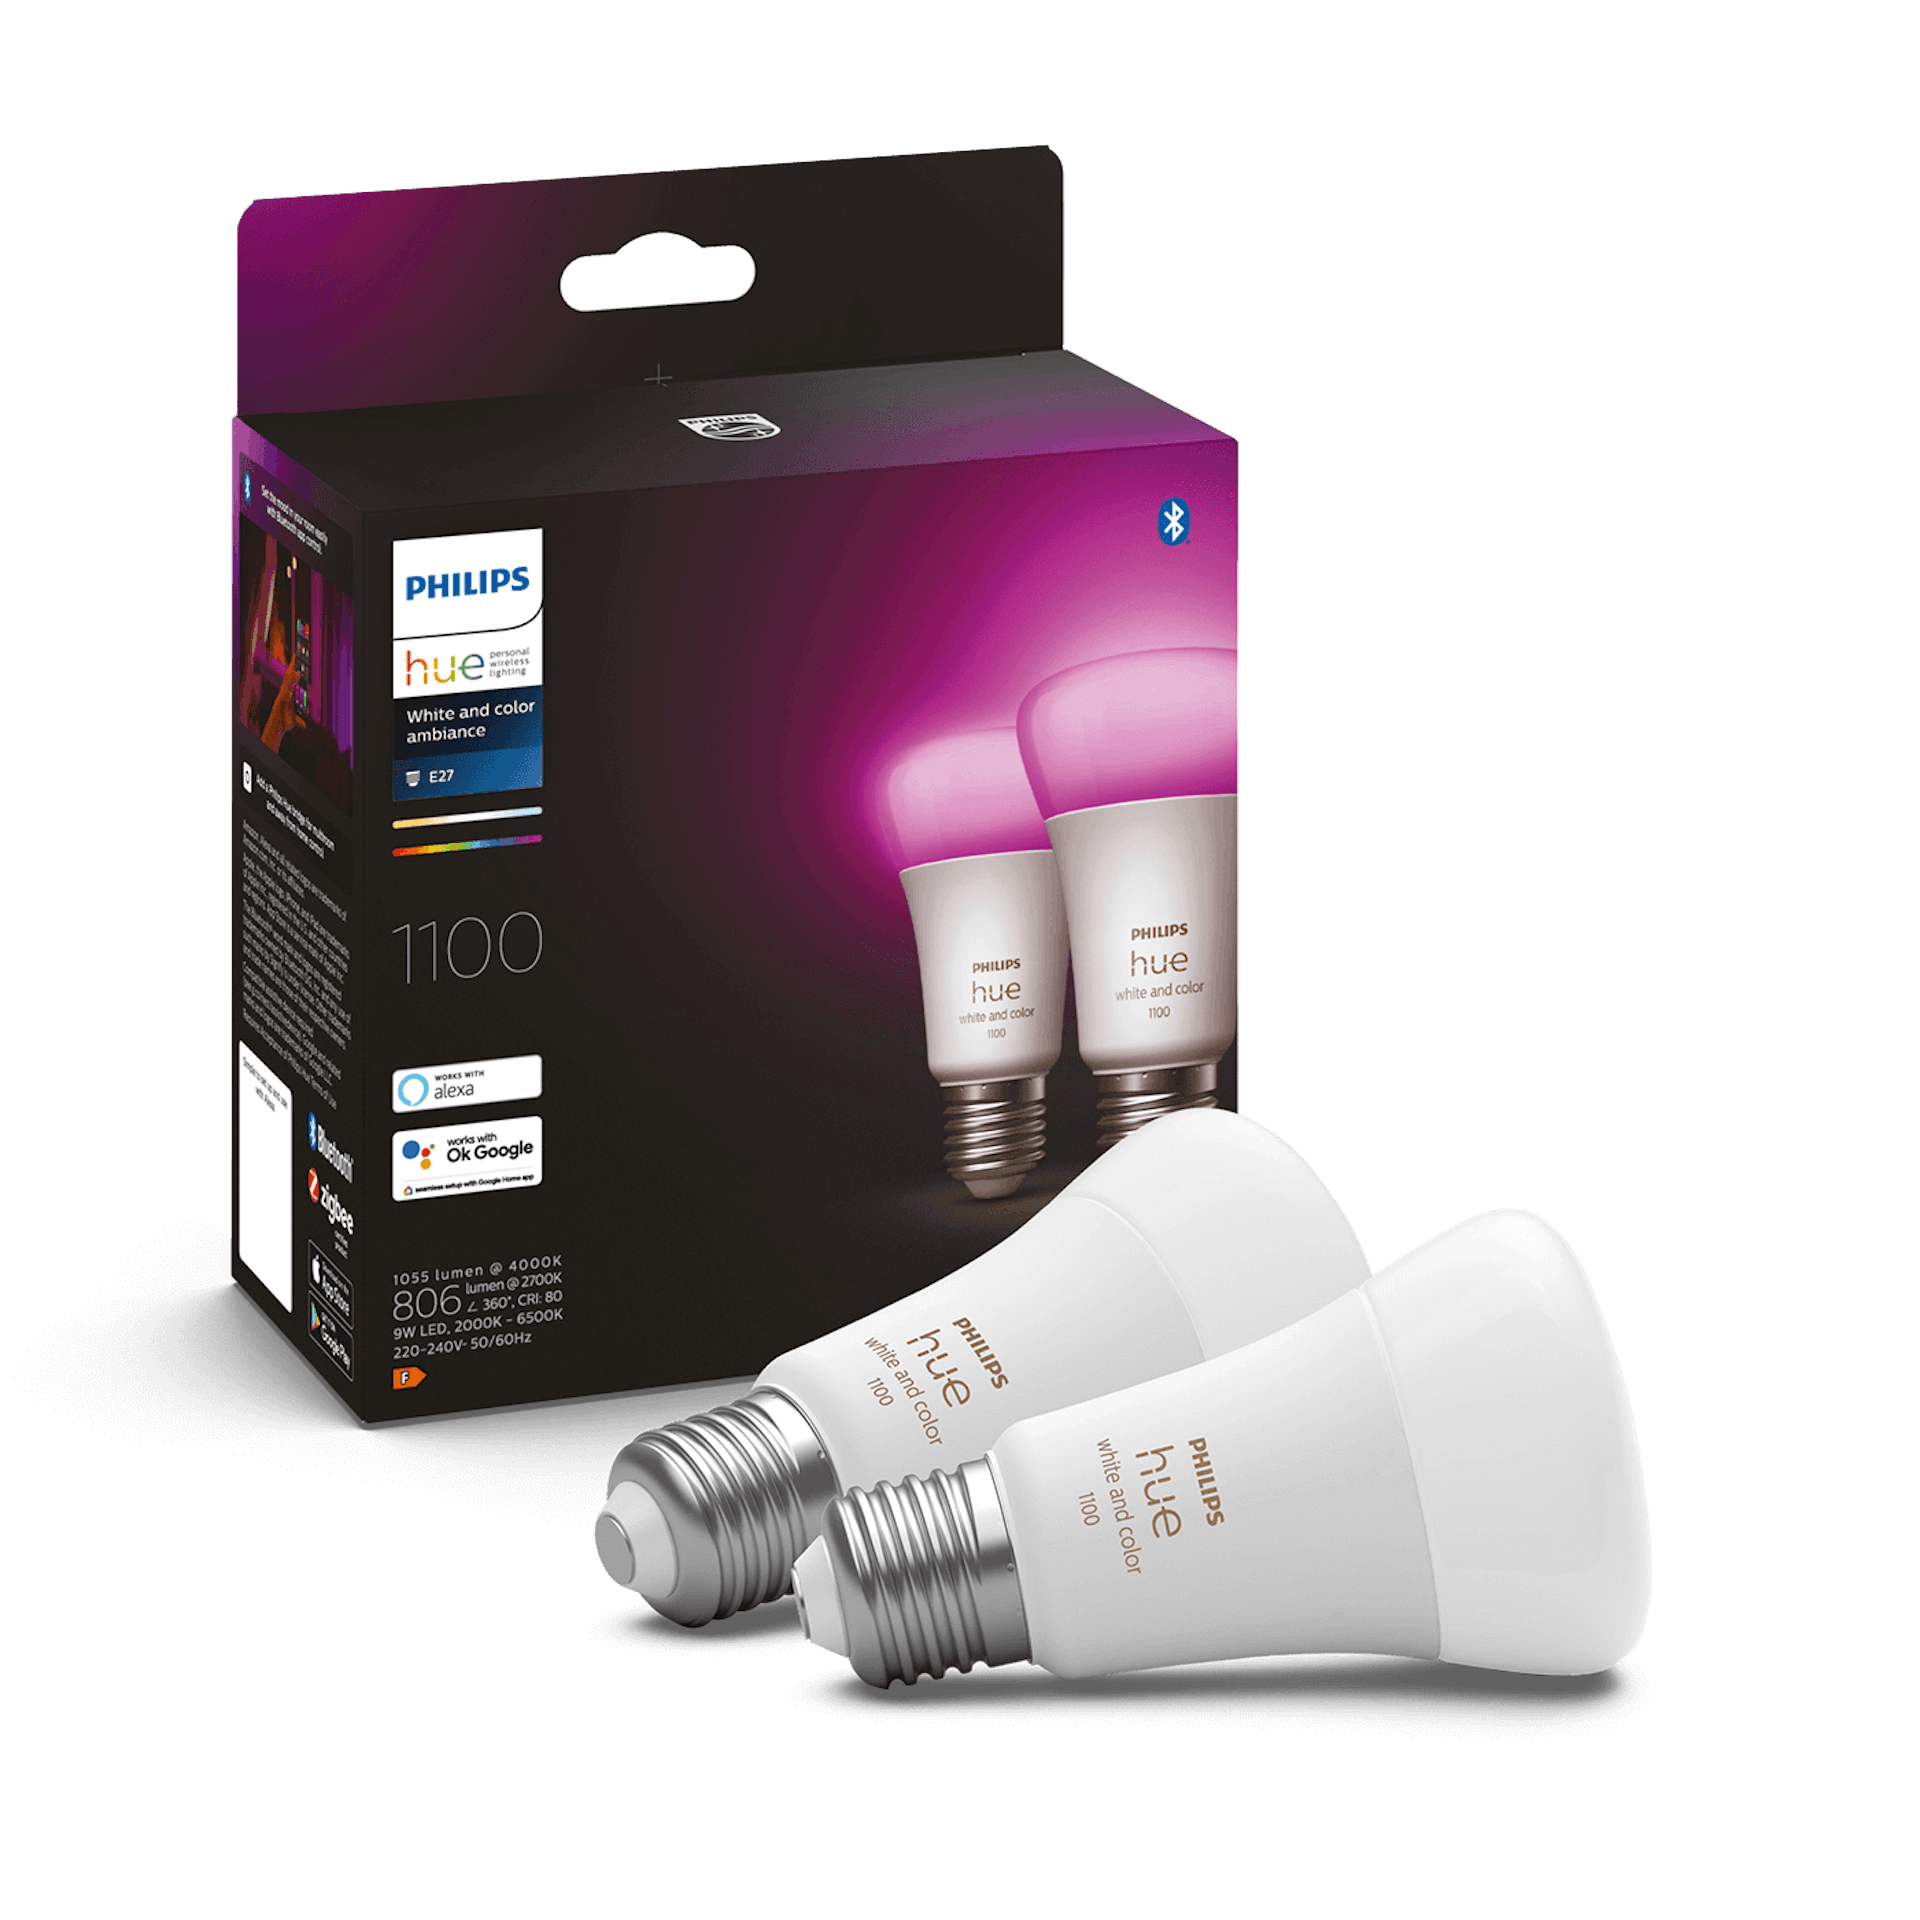 Philips Hue White/Color Ambiance E27 G2 (2-pack) - Details - Packaging image